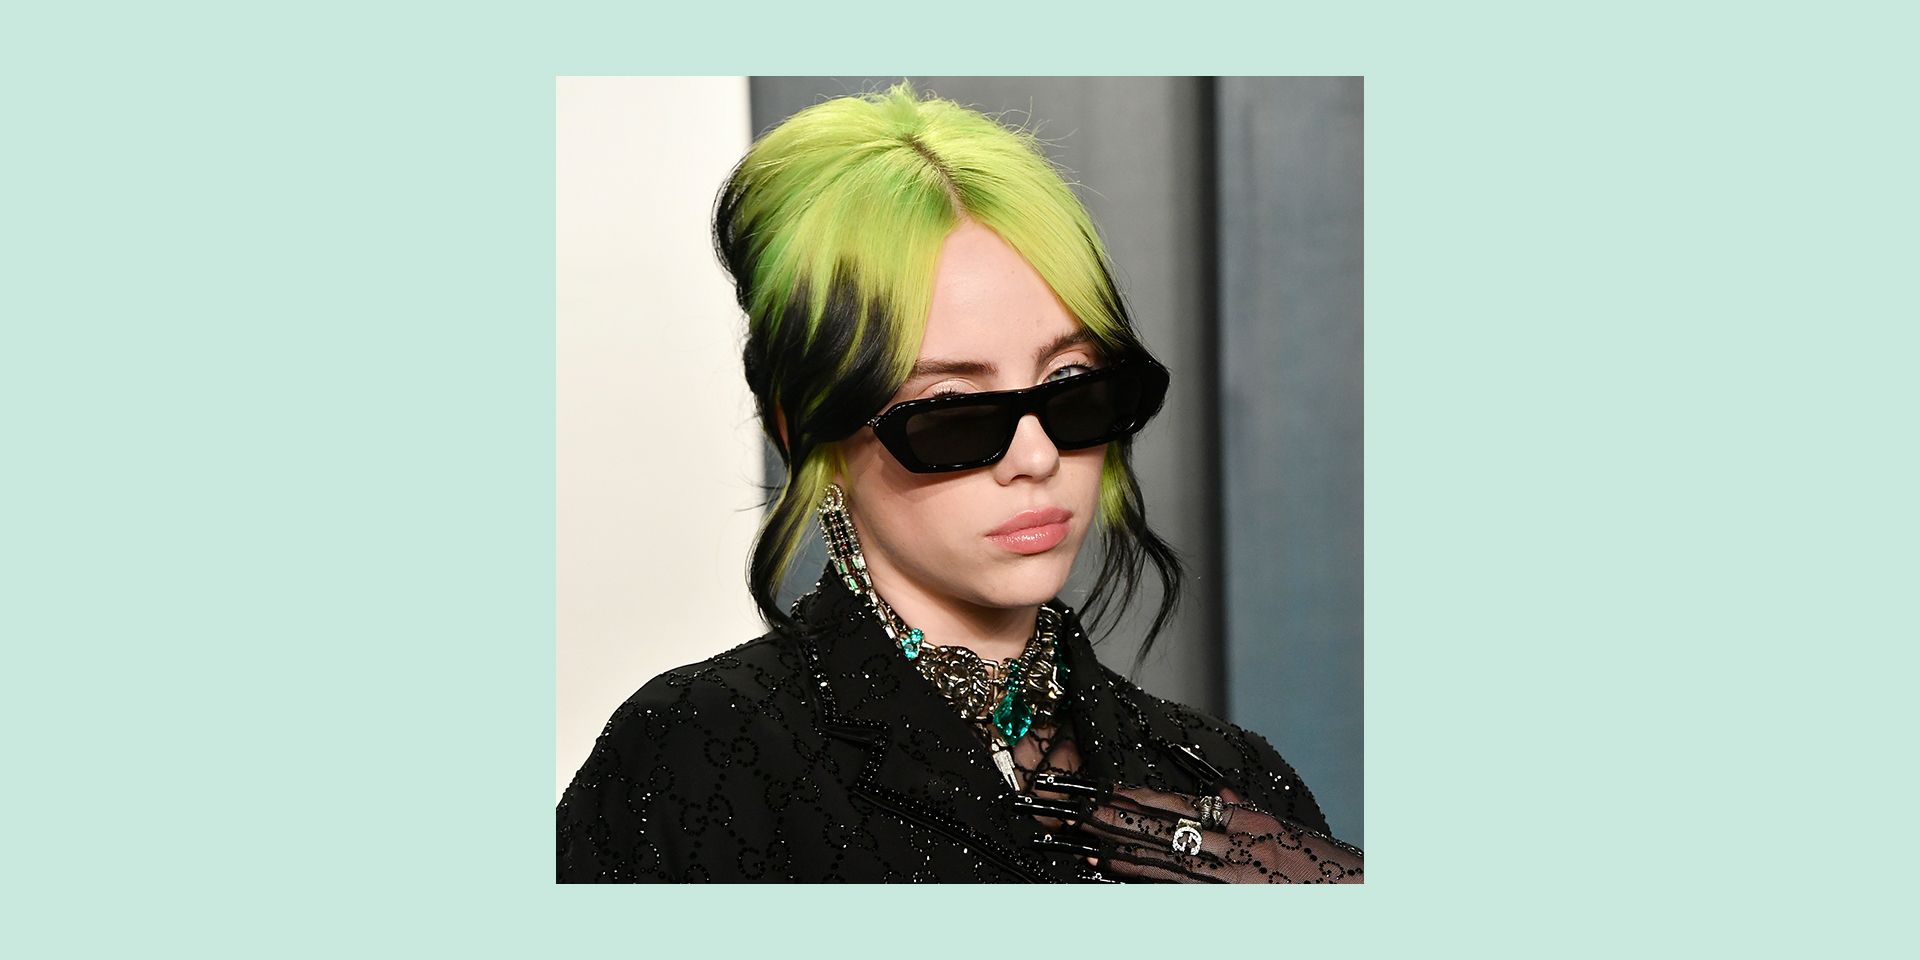 4. Blue Green Hair Color: 10 Gorgeous Shades to Try - wide 2